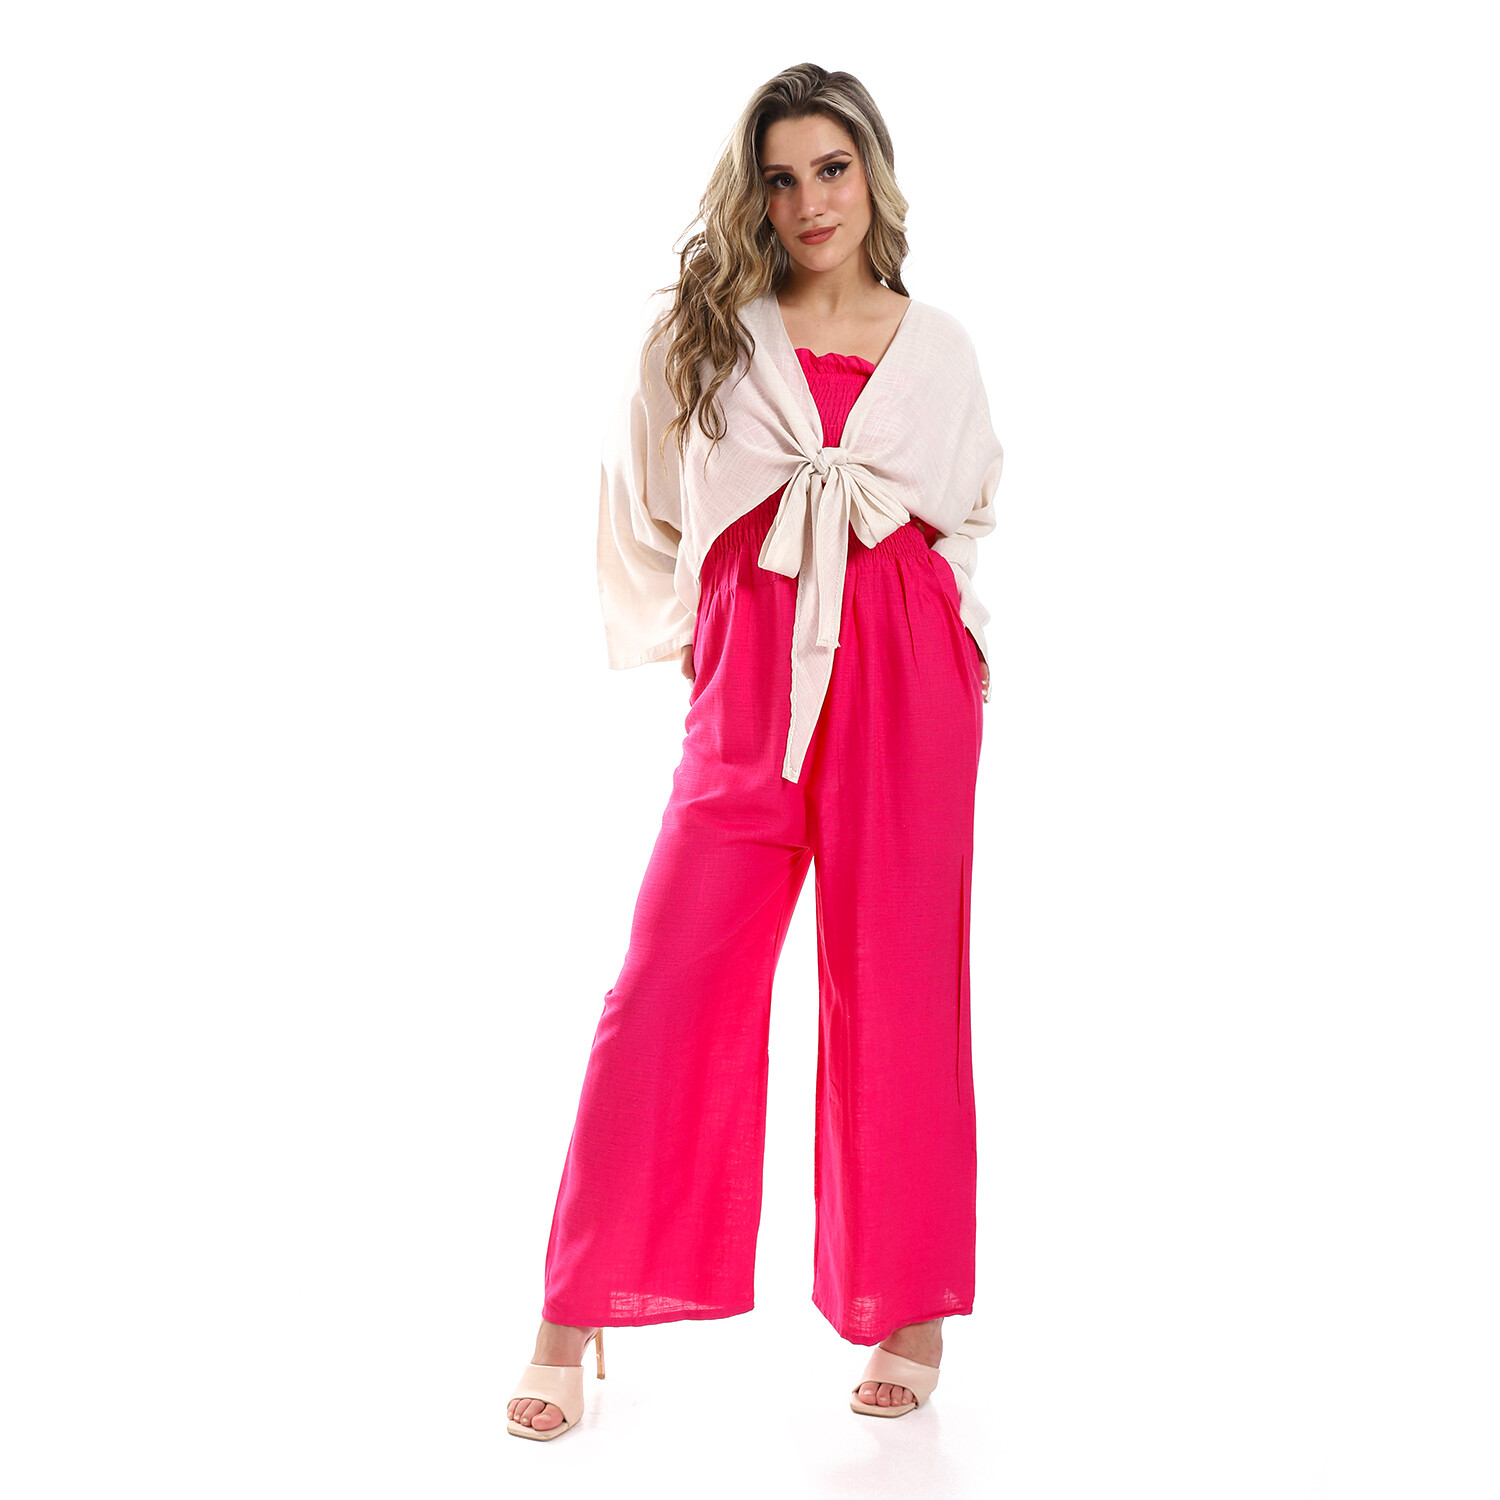 Tie Strap Shirred Bust Jumpsuit With Off-White Cardigan - Fuchsia 2988